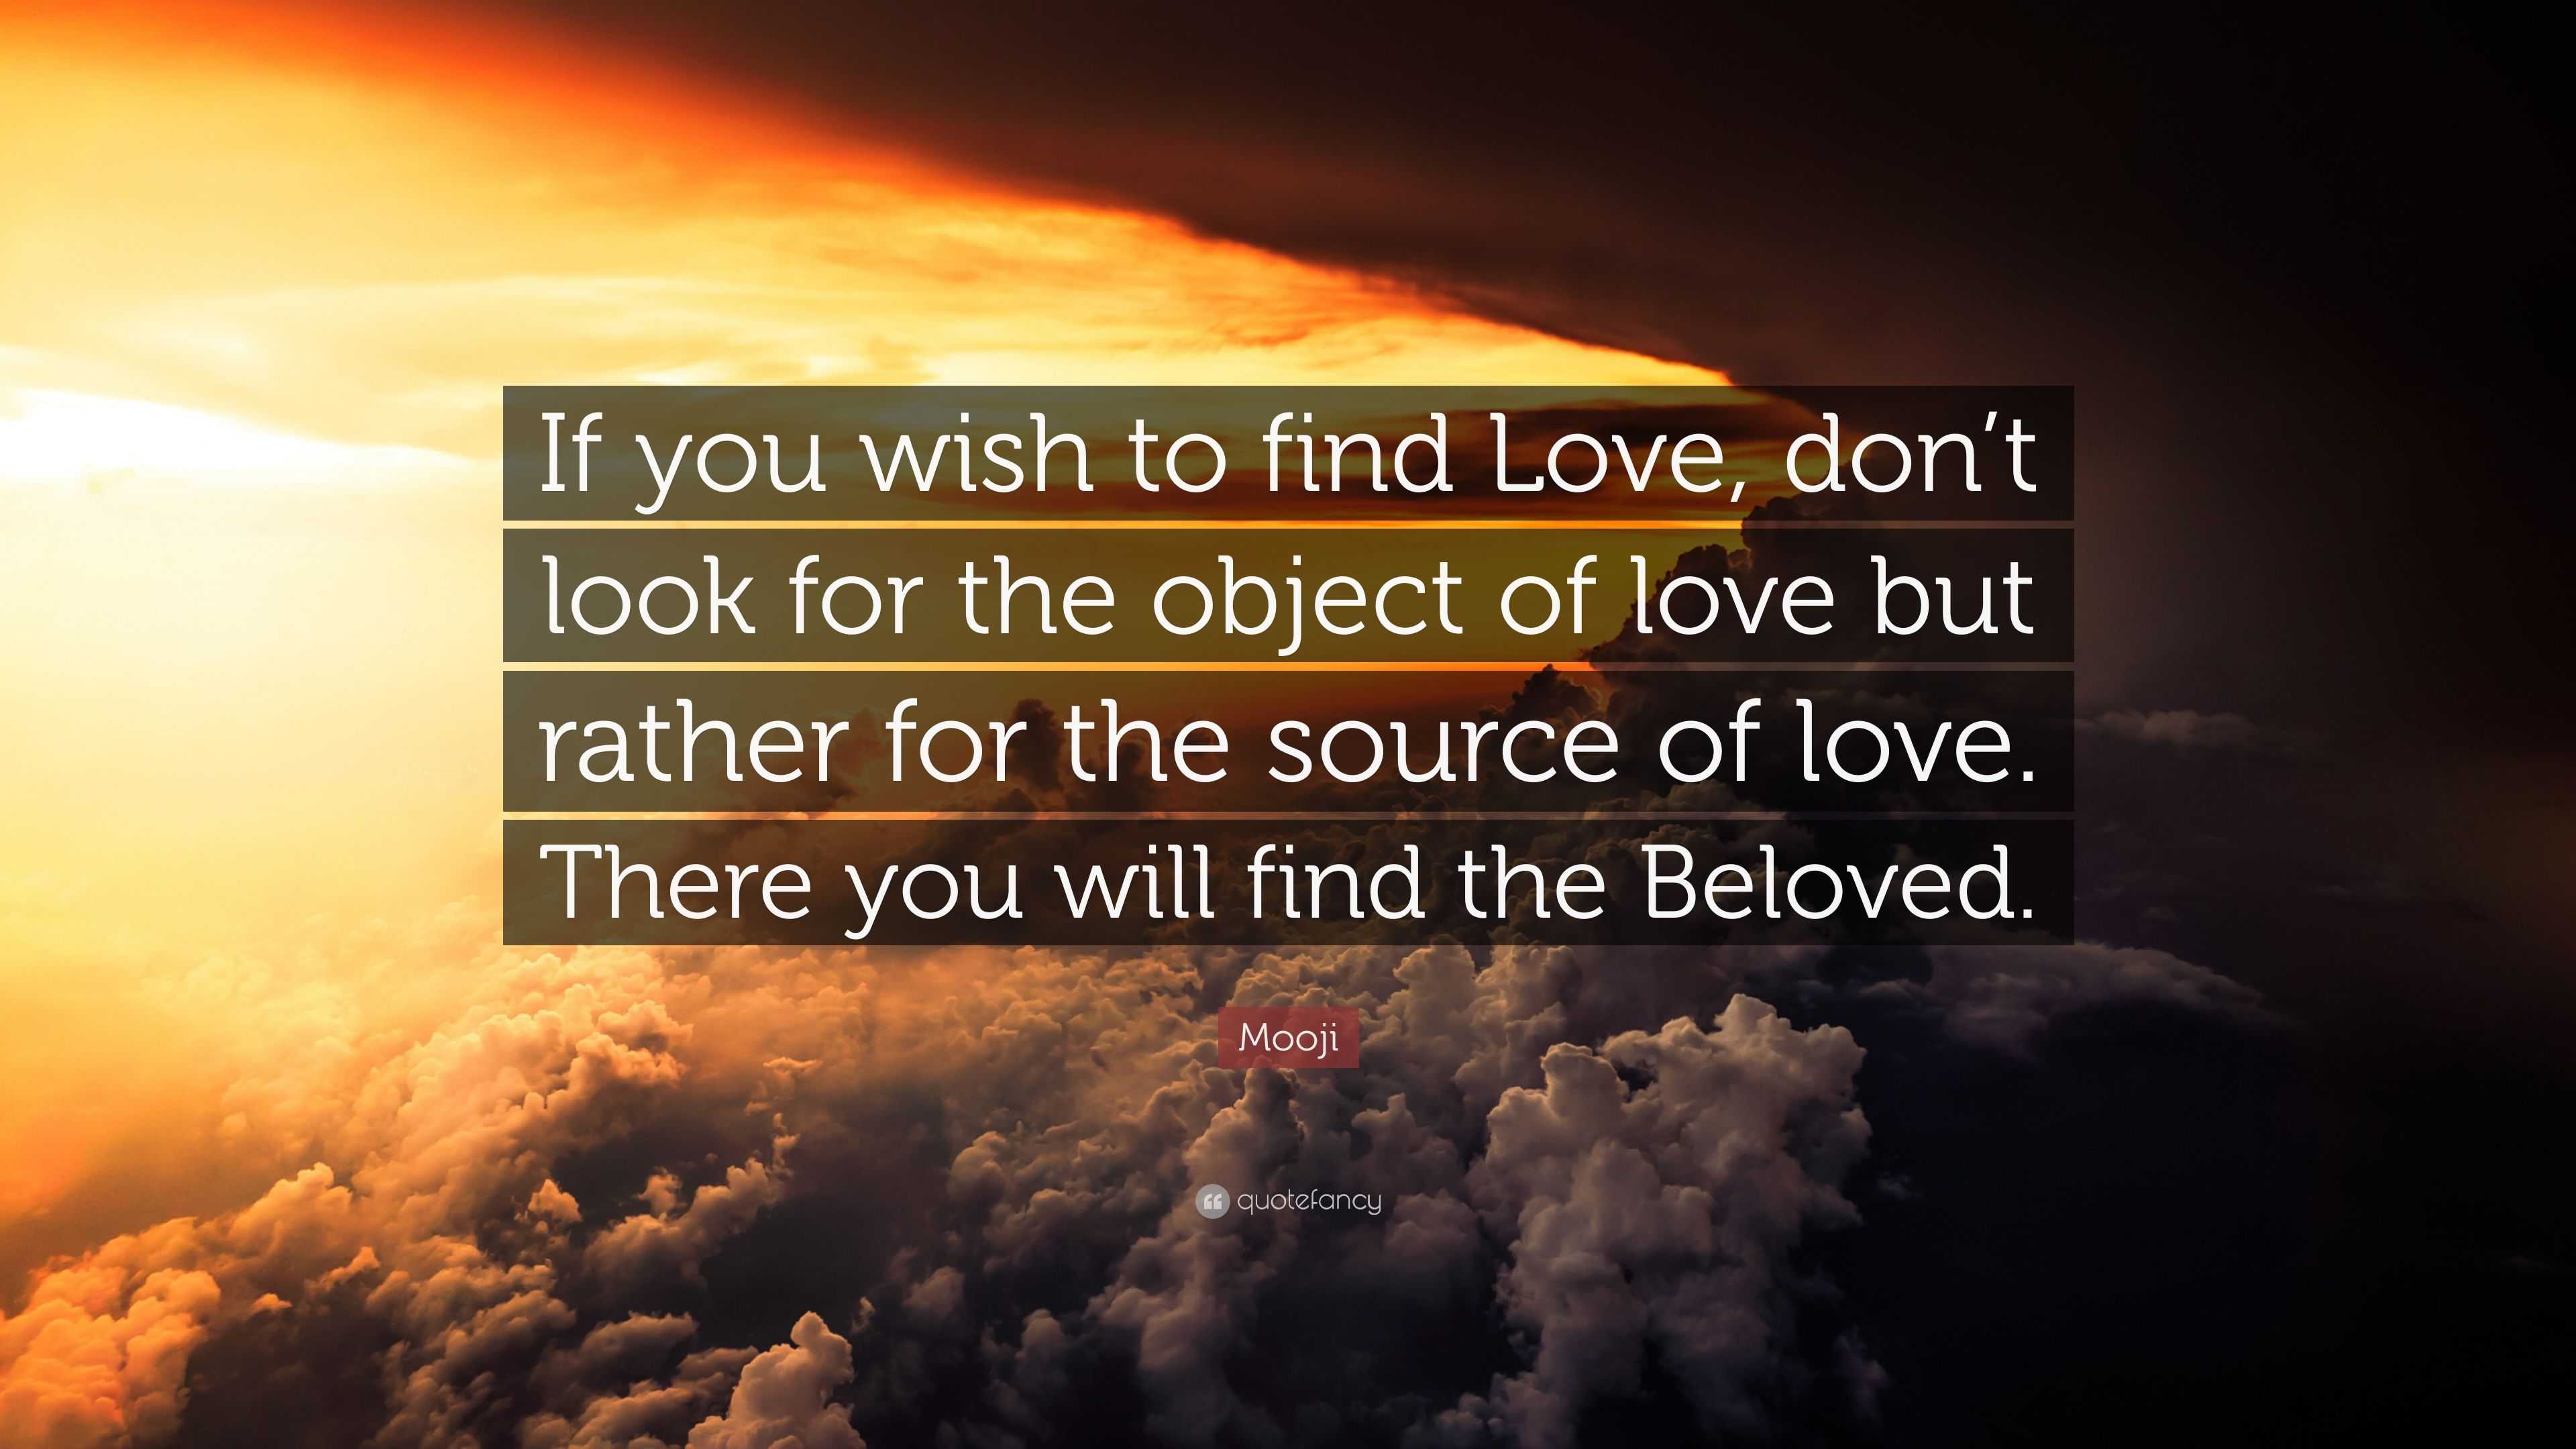 Mooji Quote “If you wish to find Love don t look for